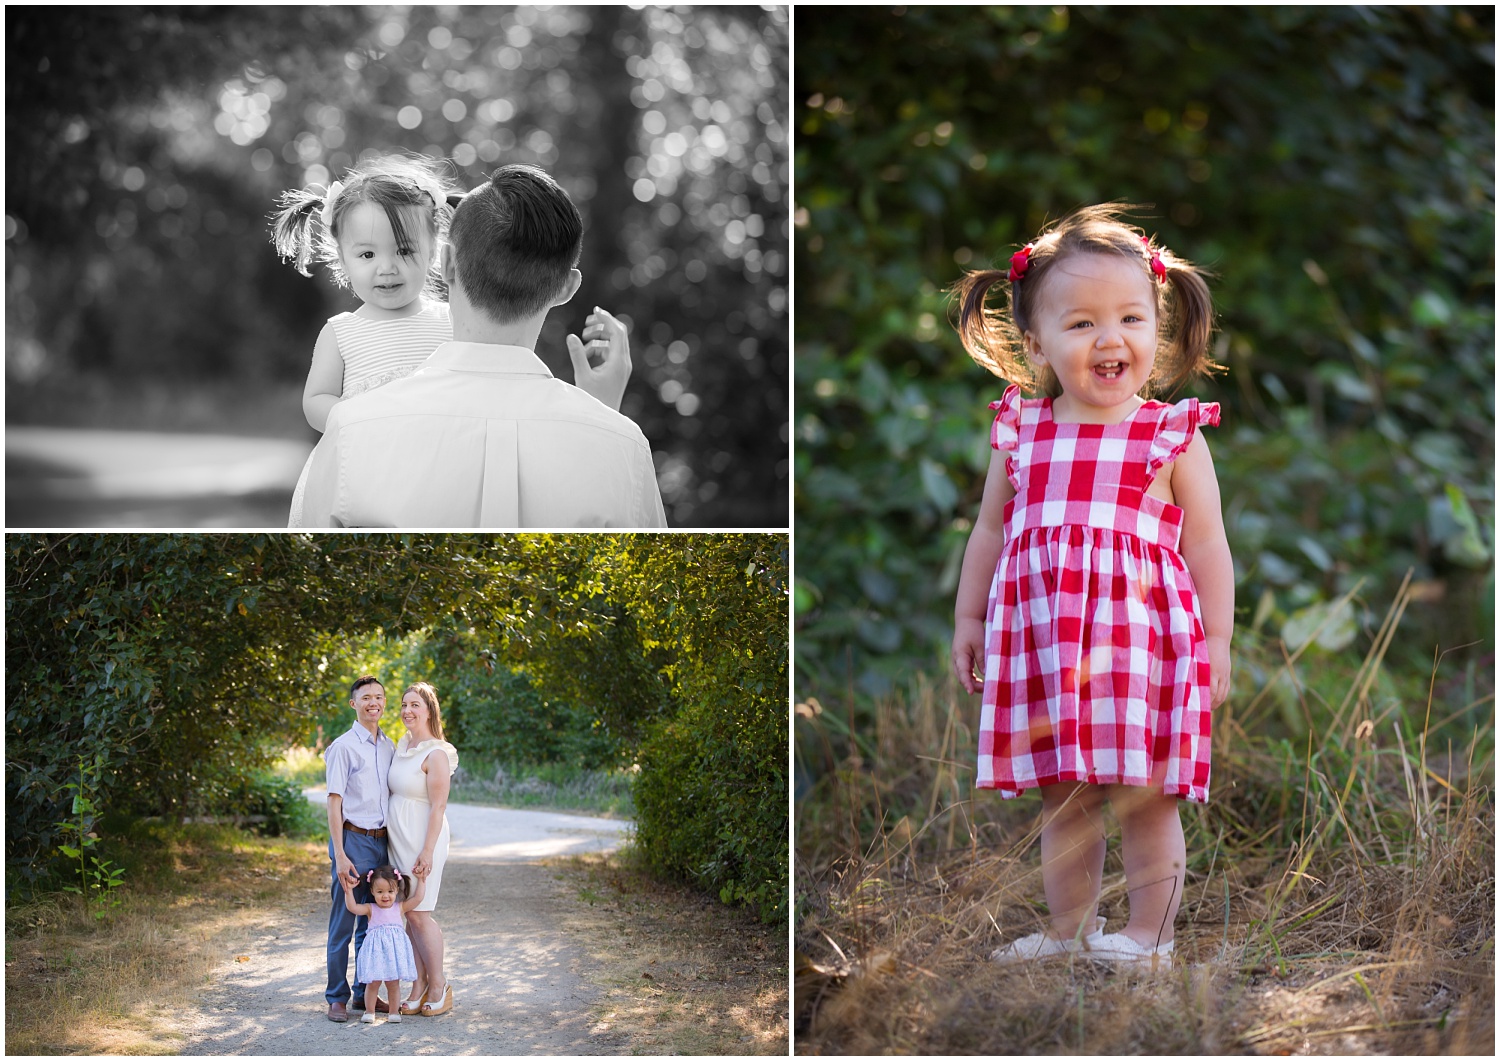 Amazing Day Photography - Blackie Spit Family Session - Langley Family Photographer (4).jpg